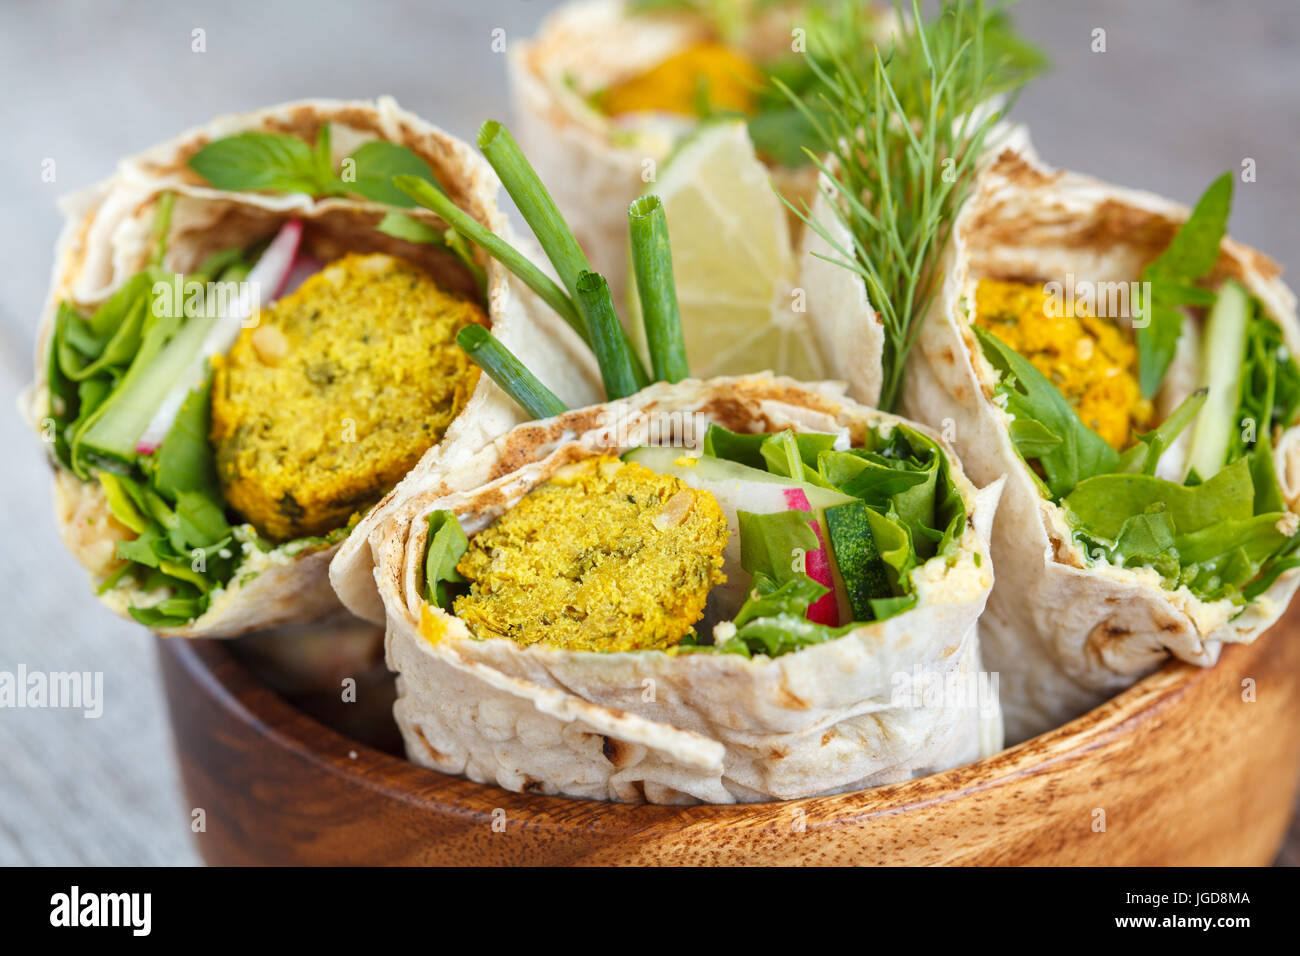 Vegan falafel wraps with salad and hummus. Love for a healthy ...